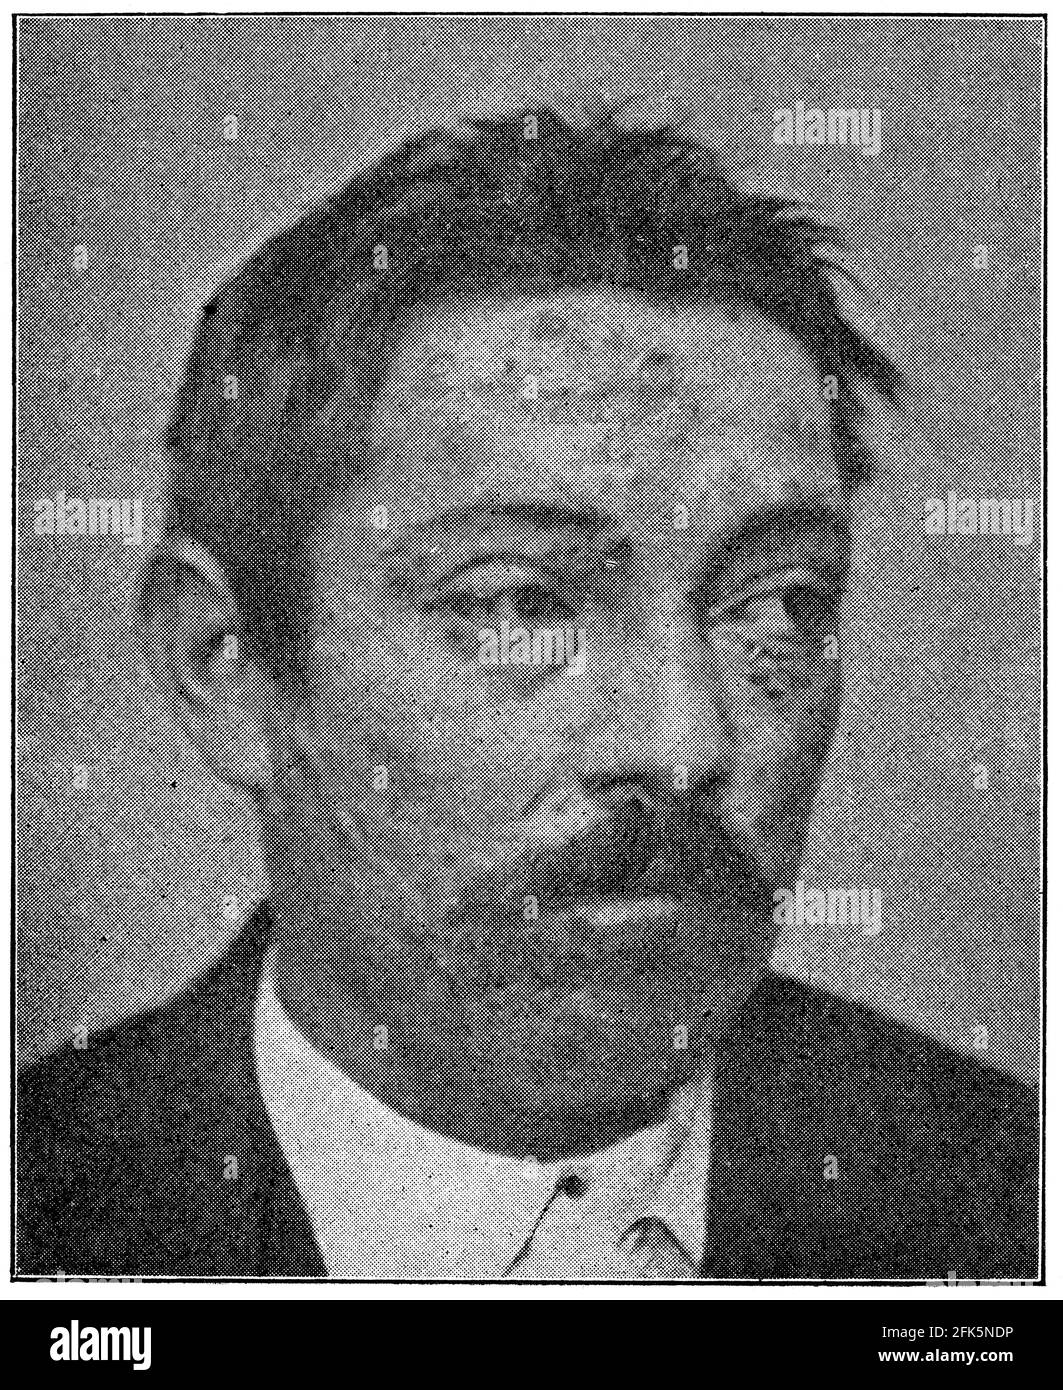 This patient presented with a malignant Syphilis. Illustration of the 19th century. Germany. White background. Stock Photo